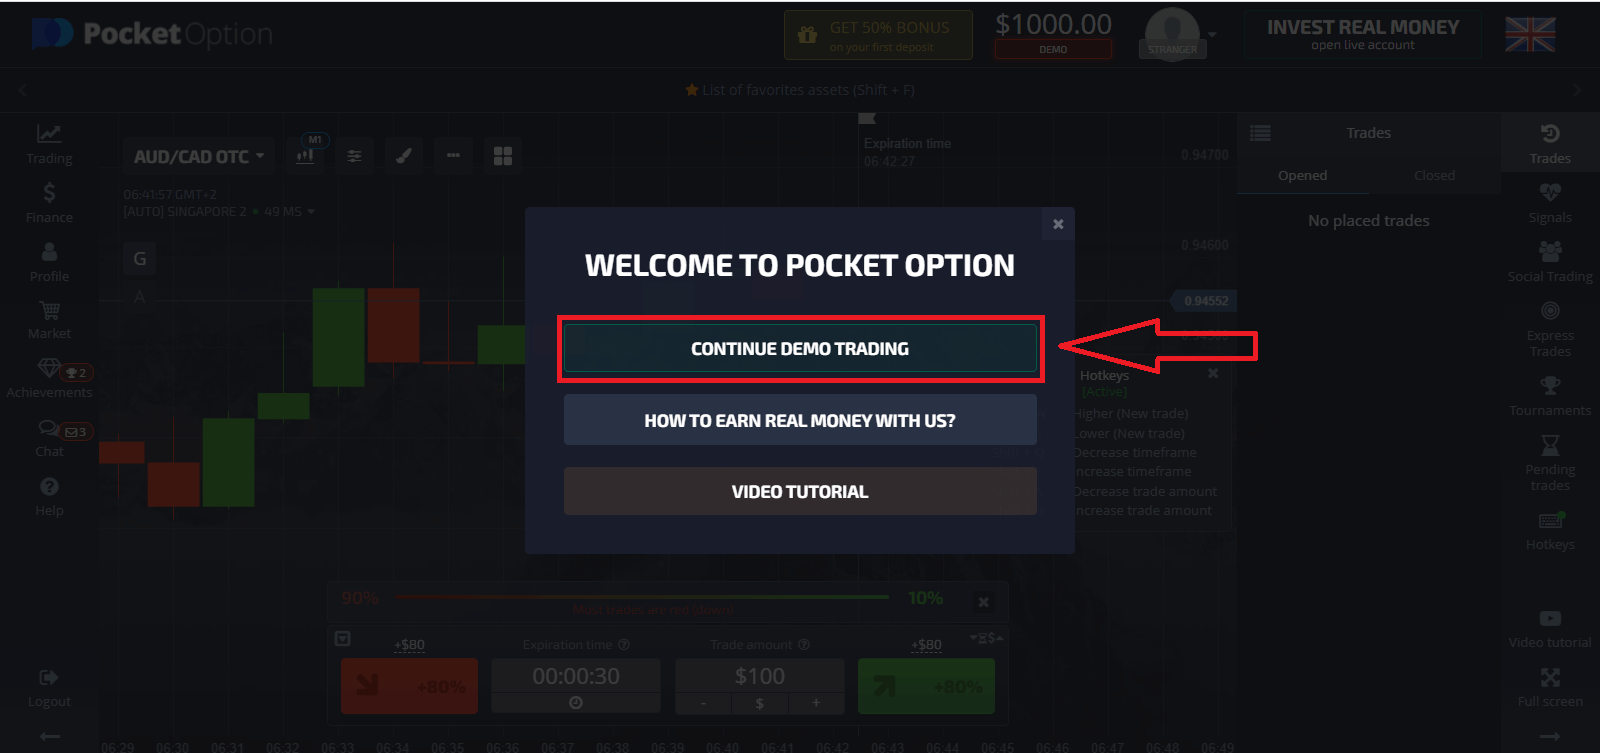 How to Sign Up and Deposit Money at Pocket Option